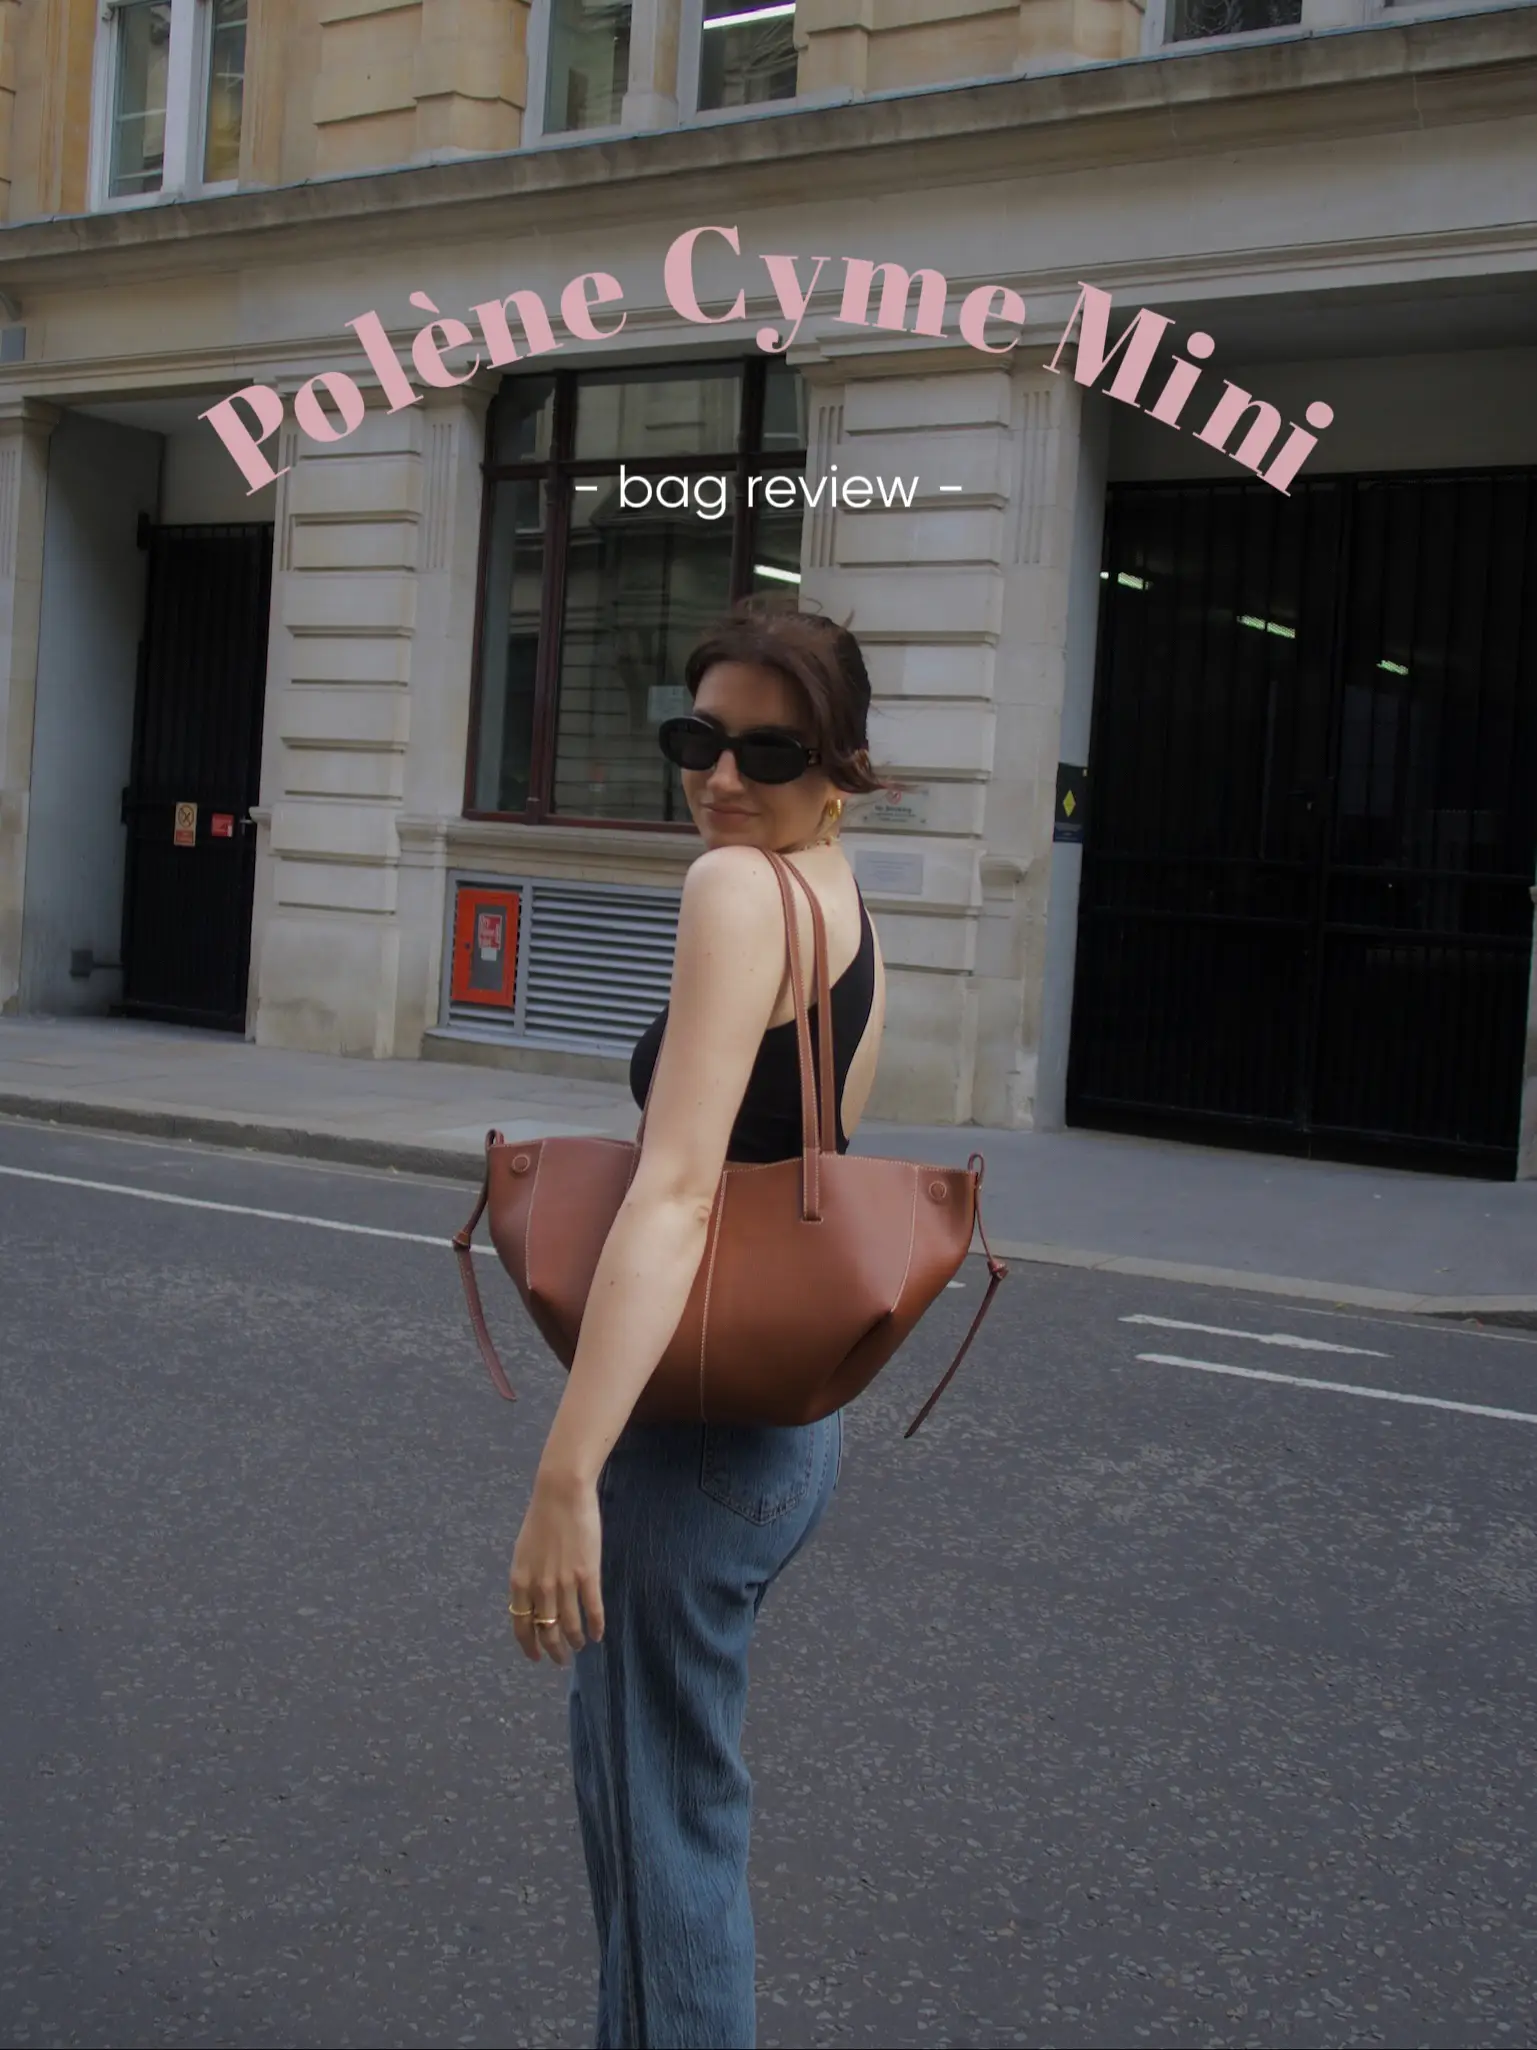 Polene Number One Mini Bag Unboxing + Review 